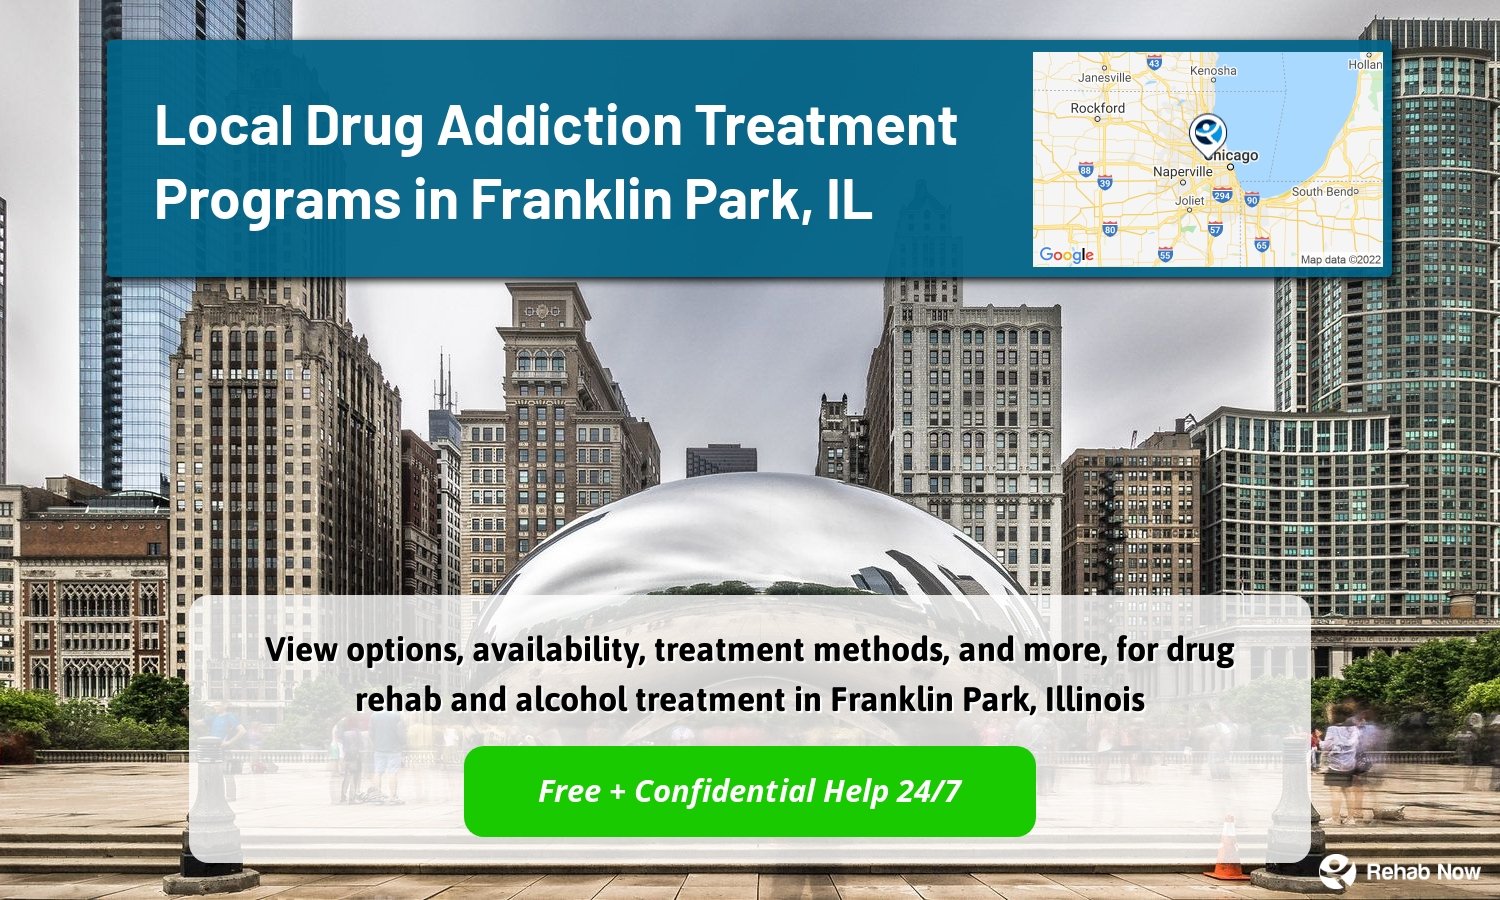 View options, availability, treatment methods, and more, for drug rehab and alcohol treatment in Franklin Park, Illinois